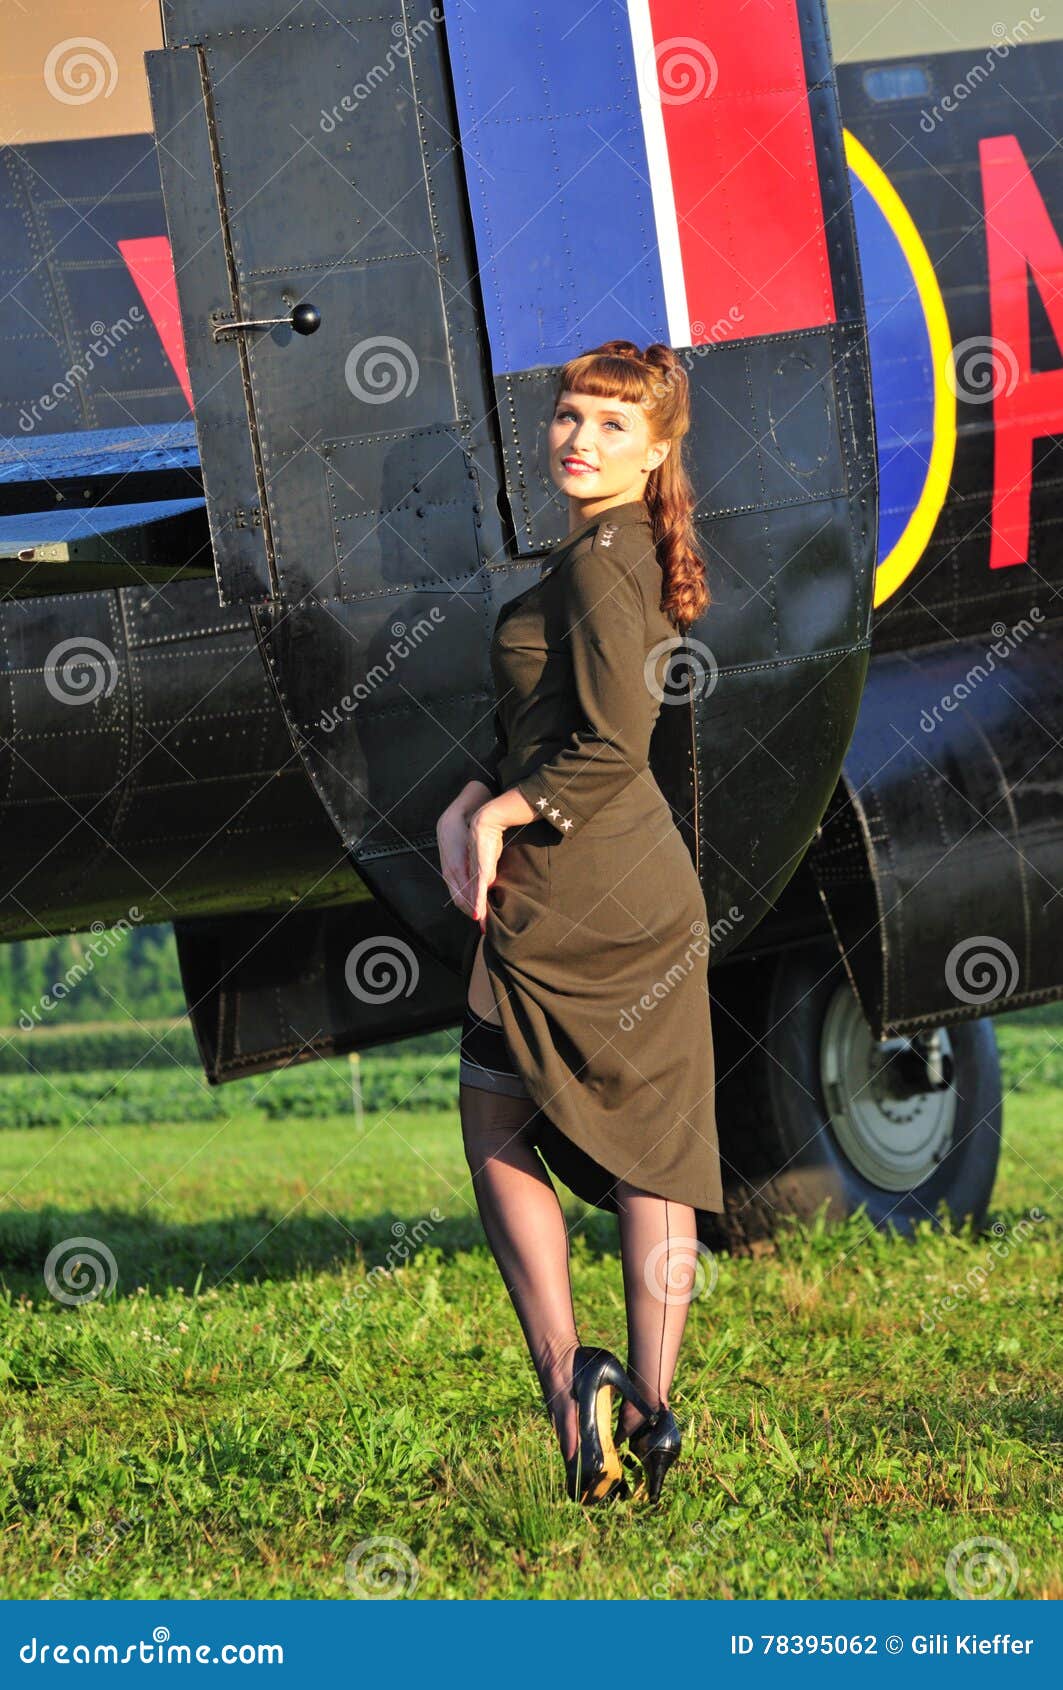 WW2 VINTAGE STYLE PRINT PRETTY BRUNETTE AIR FORCE GIRL PINUP PHOTO